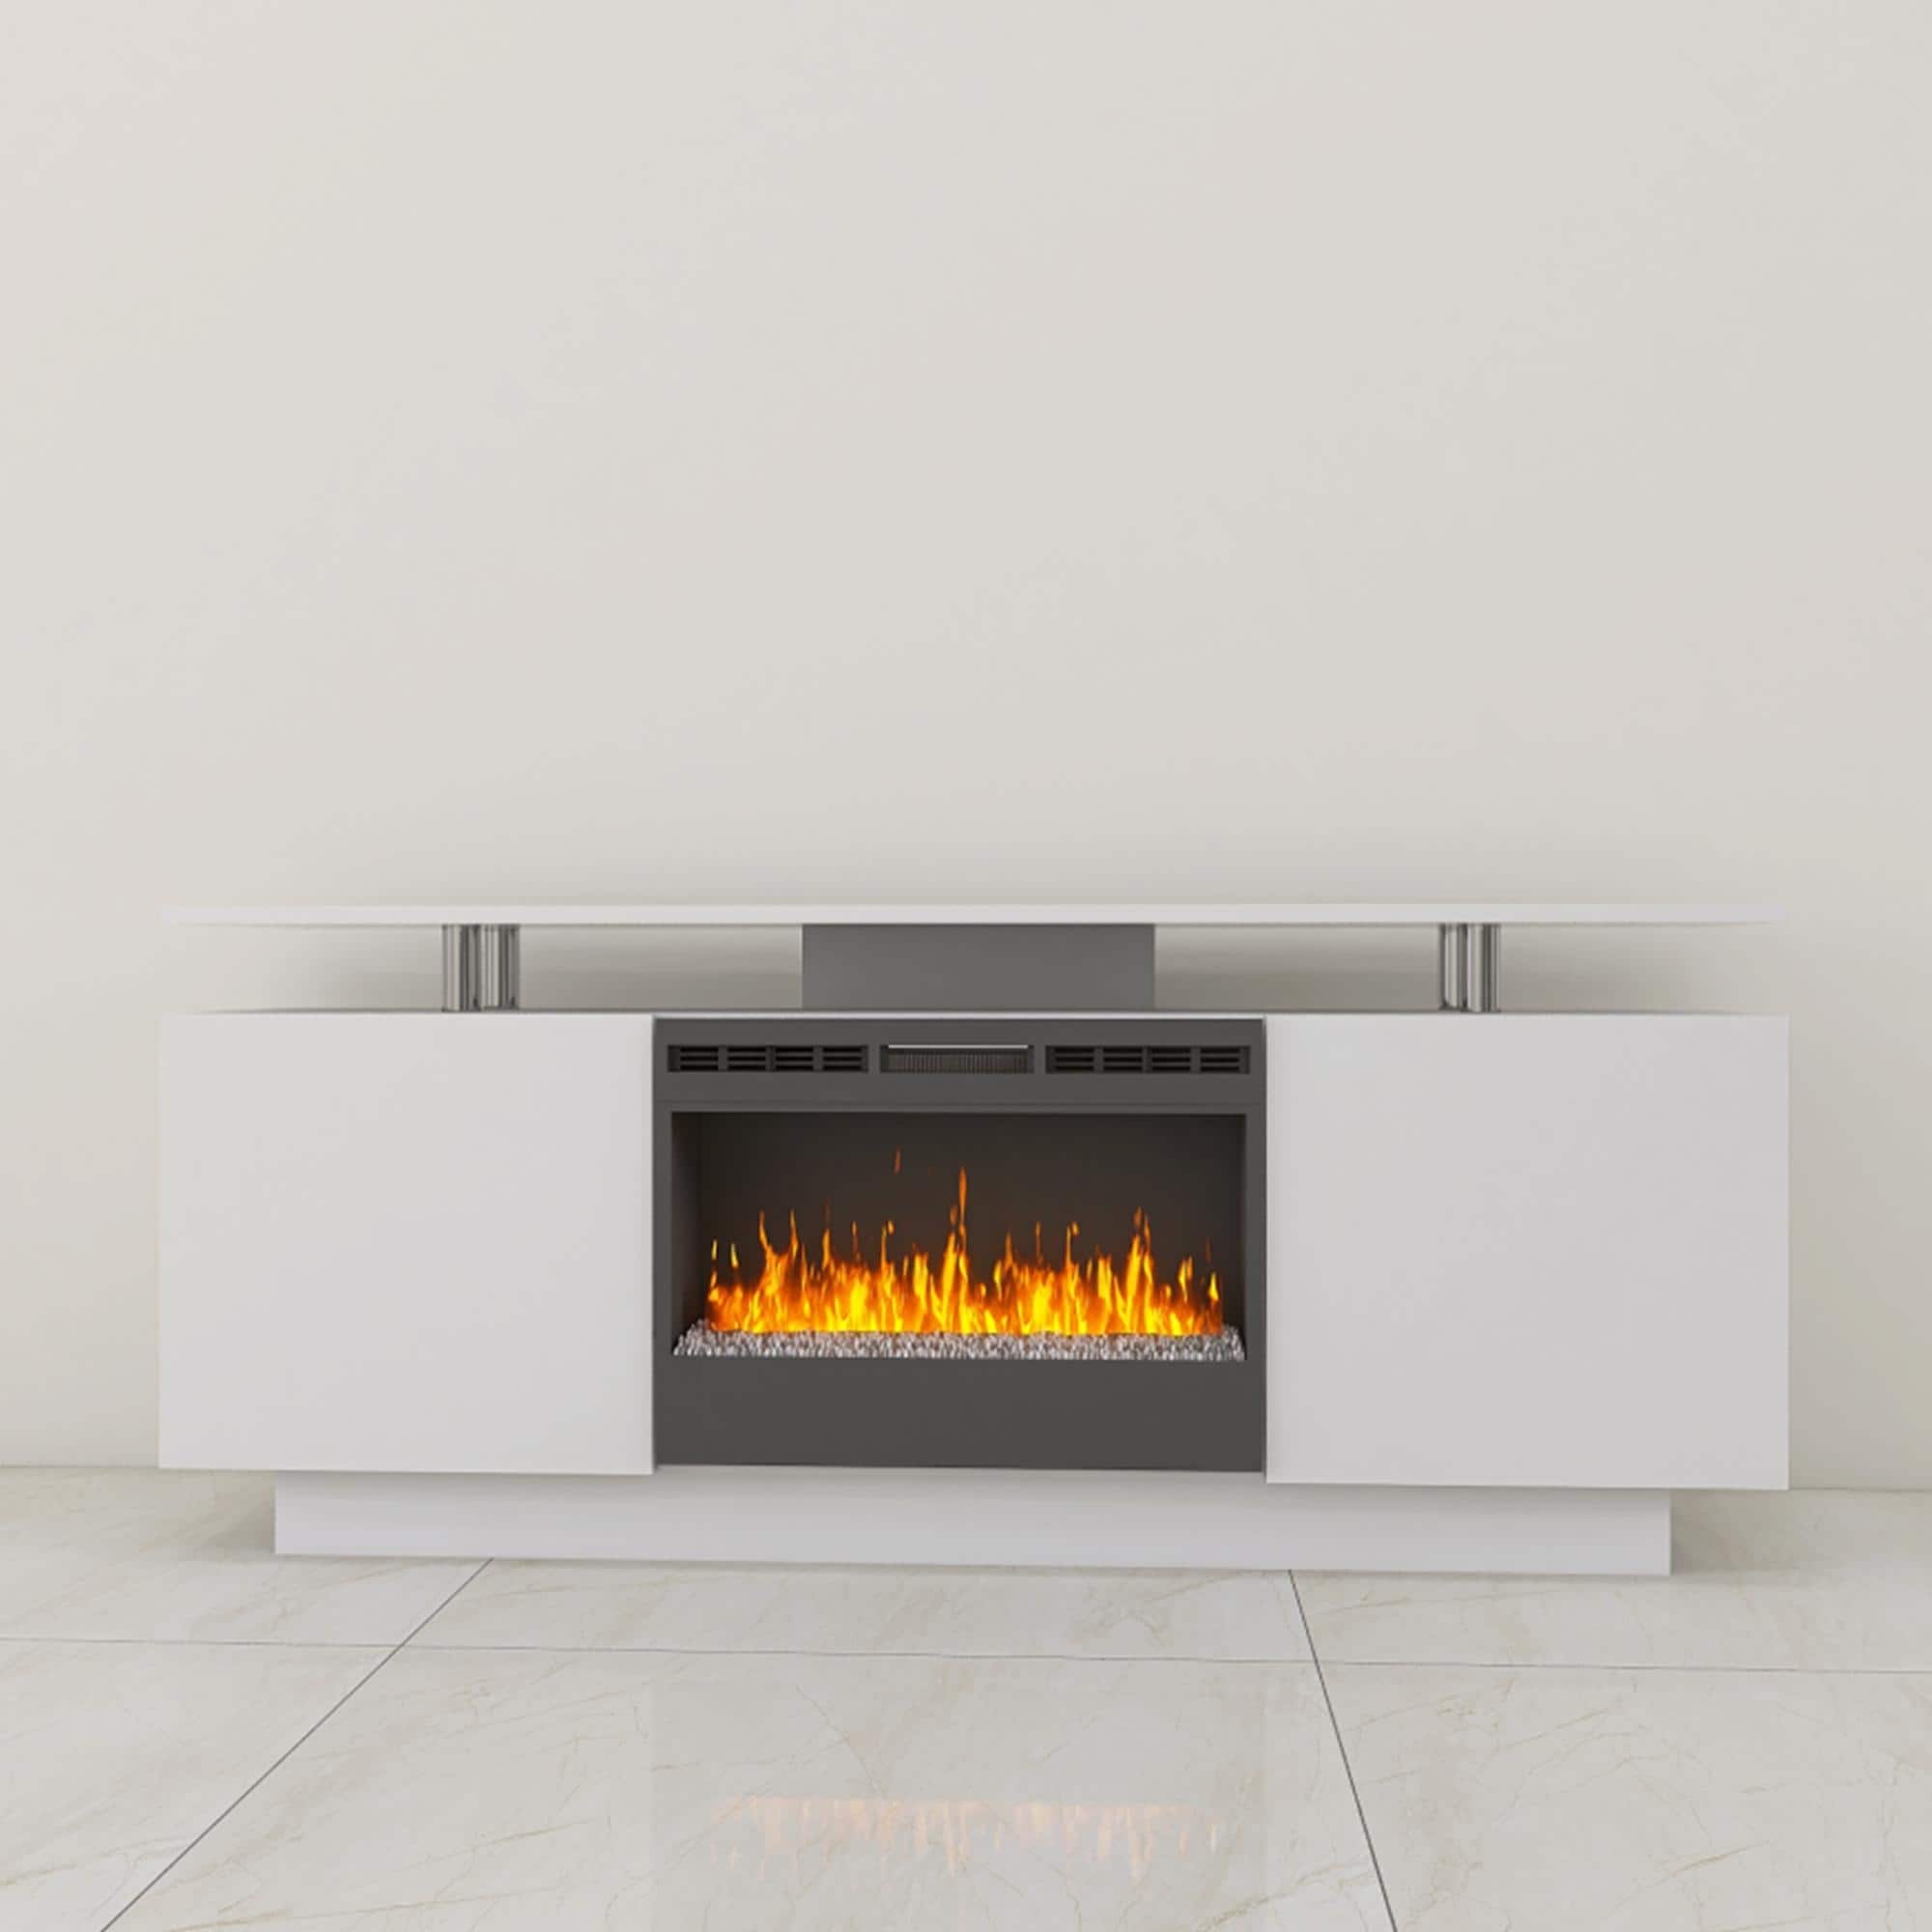 IGEMAN 160CM High Gloss TV Cabinet Tv Unit with Fireplace,Have Heat and Flame Color Changes